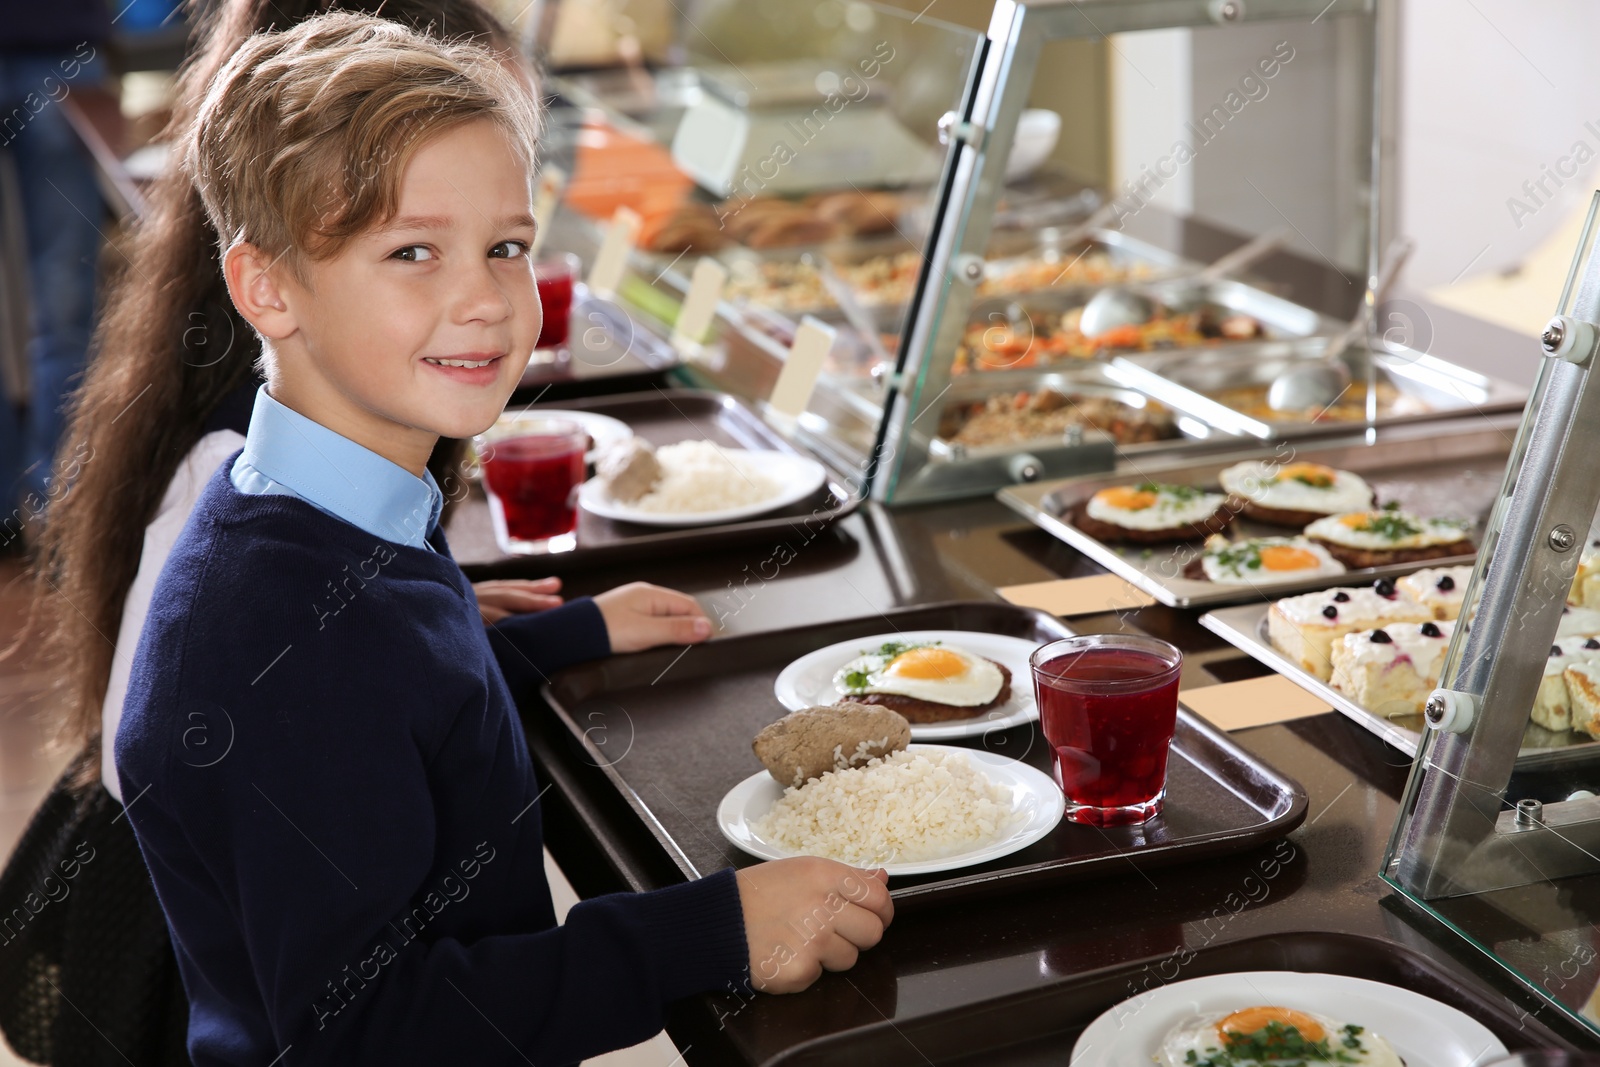 Photo of Cute boy near serving line with healthy food in school canteen